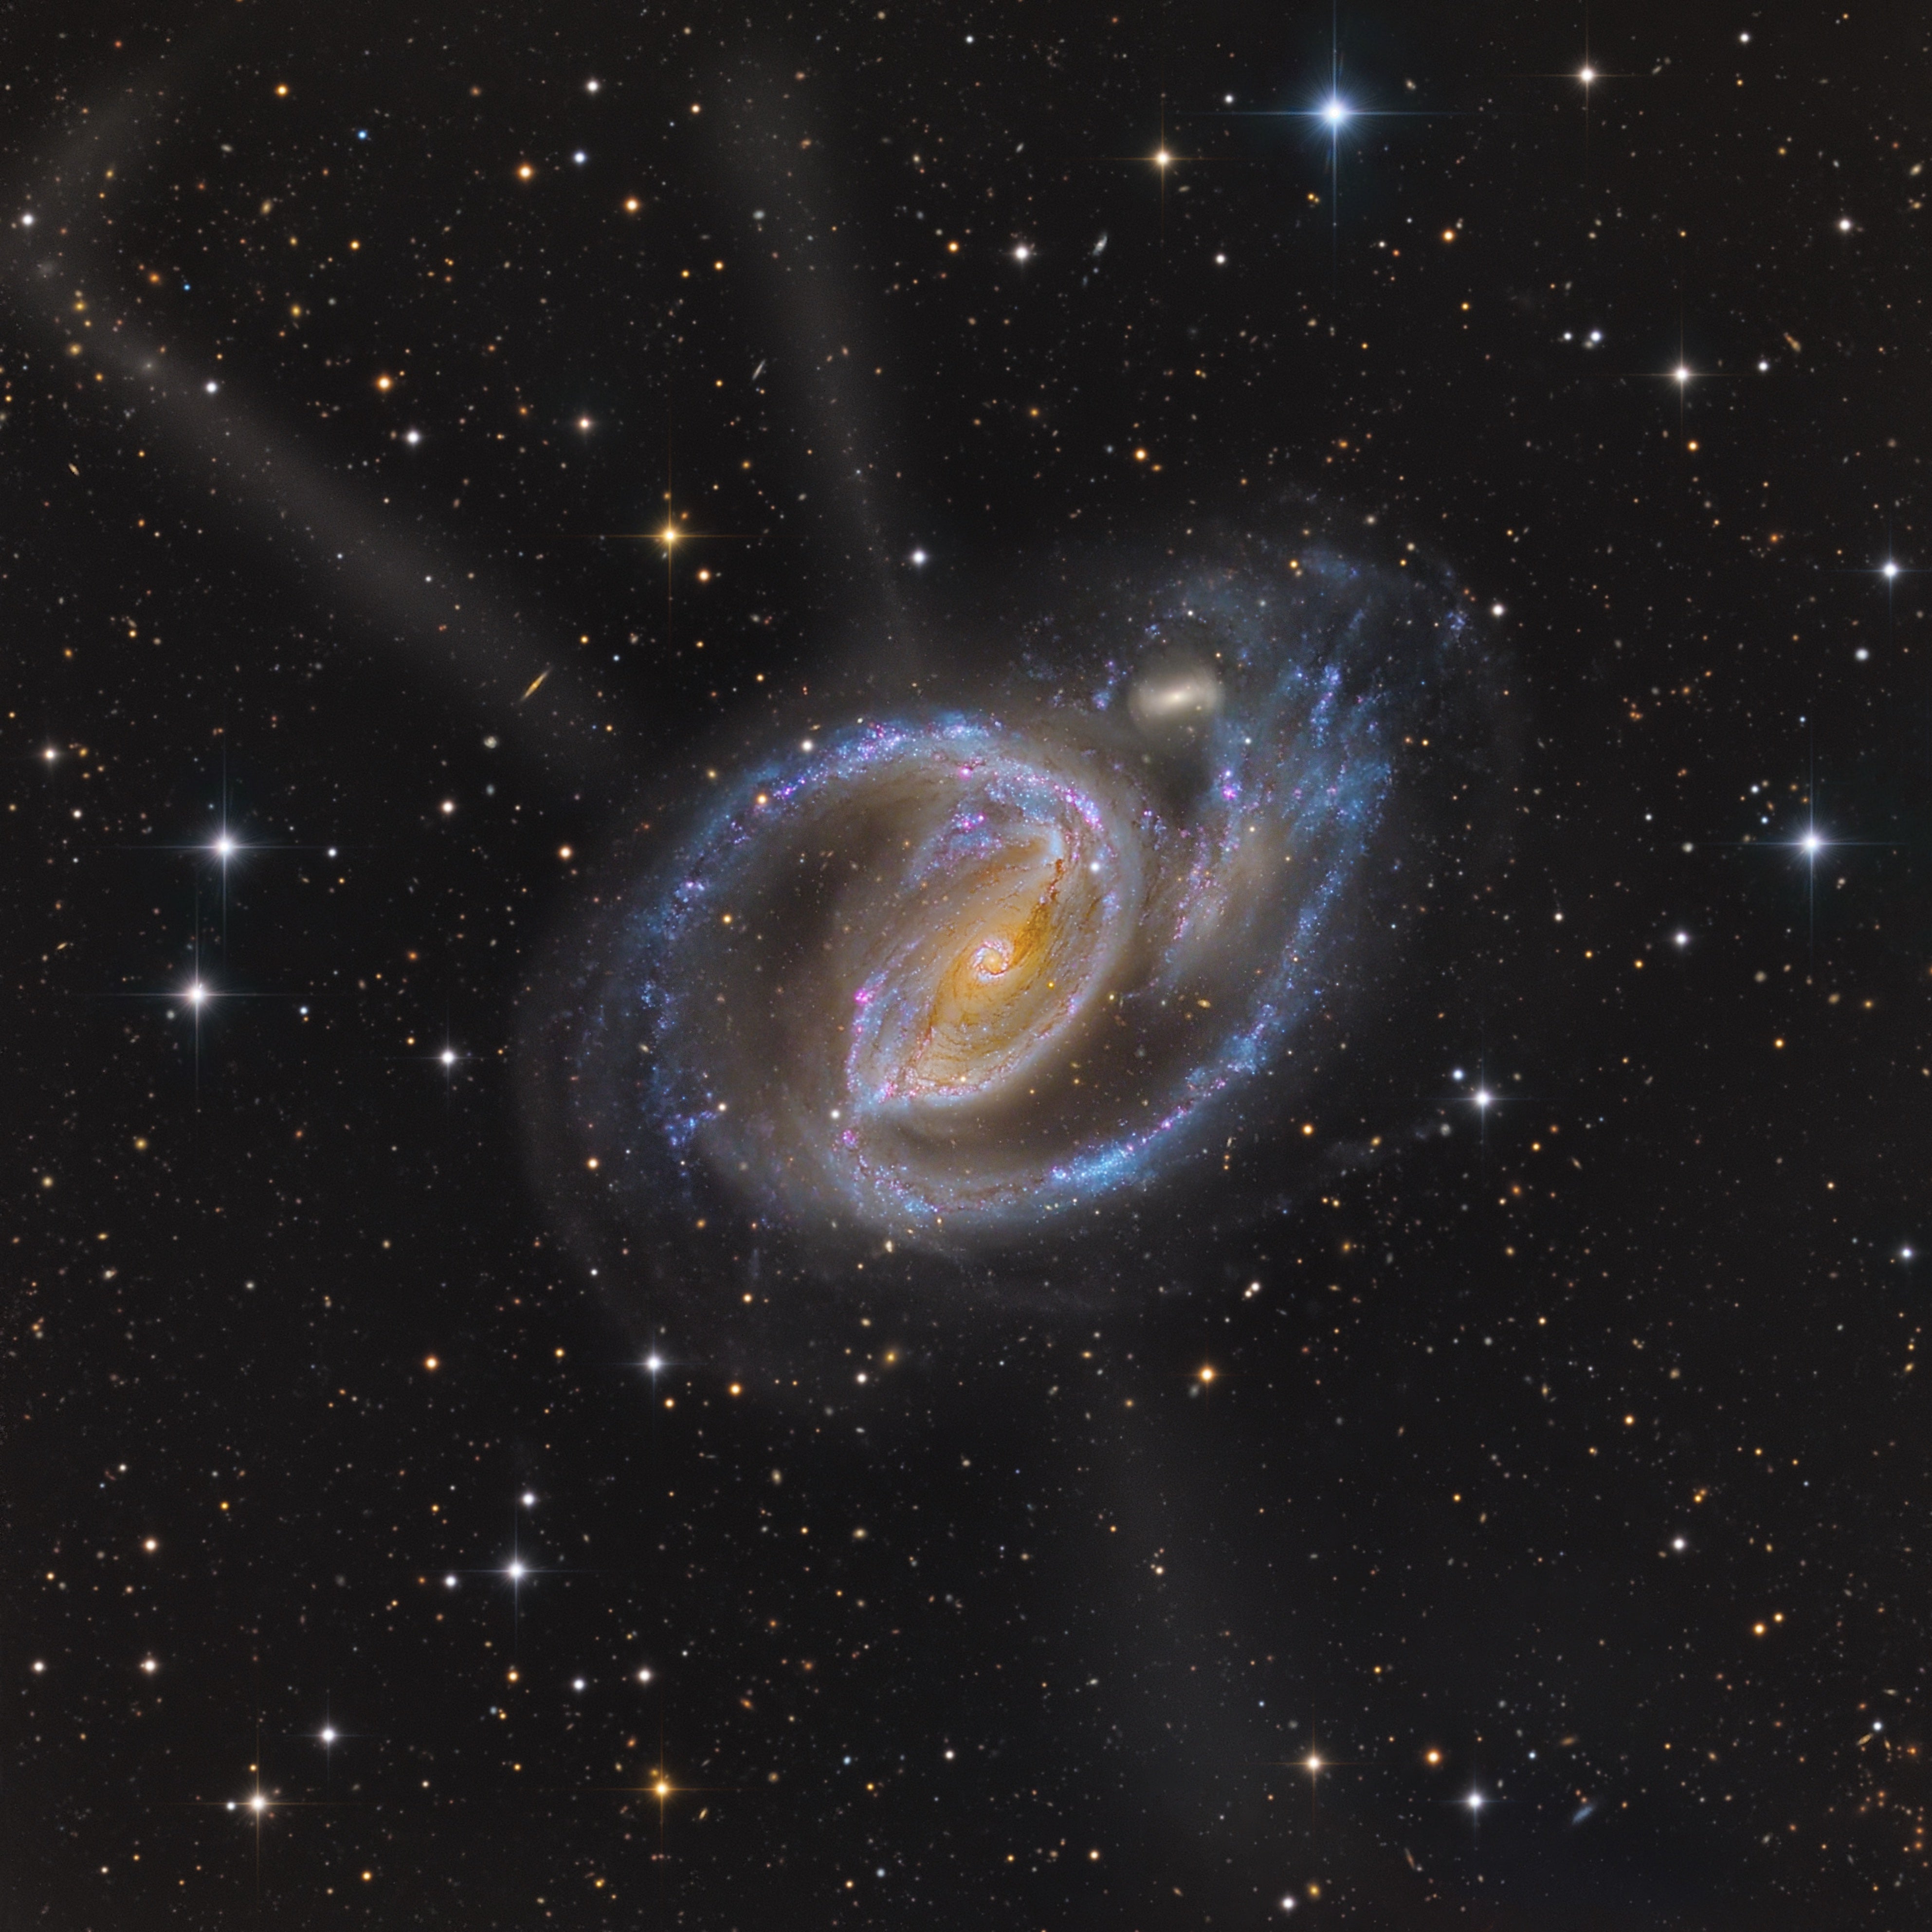 A barred spiral galaxy called NGC 1097. (Image: Mike Selby)